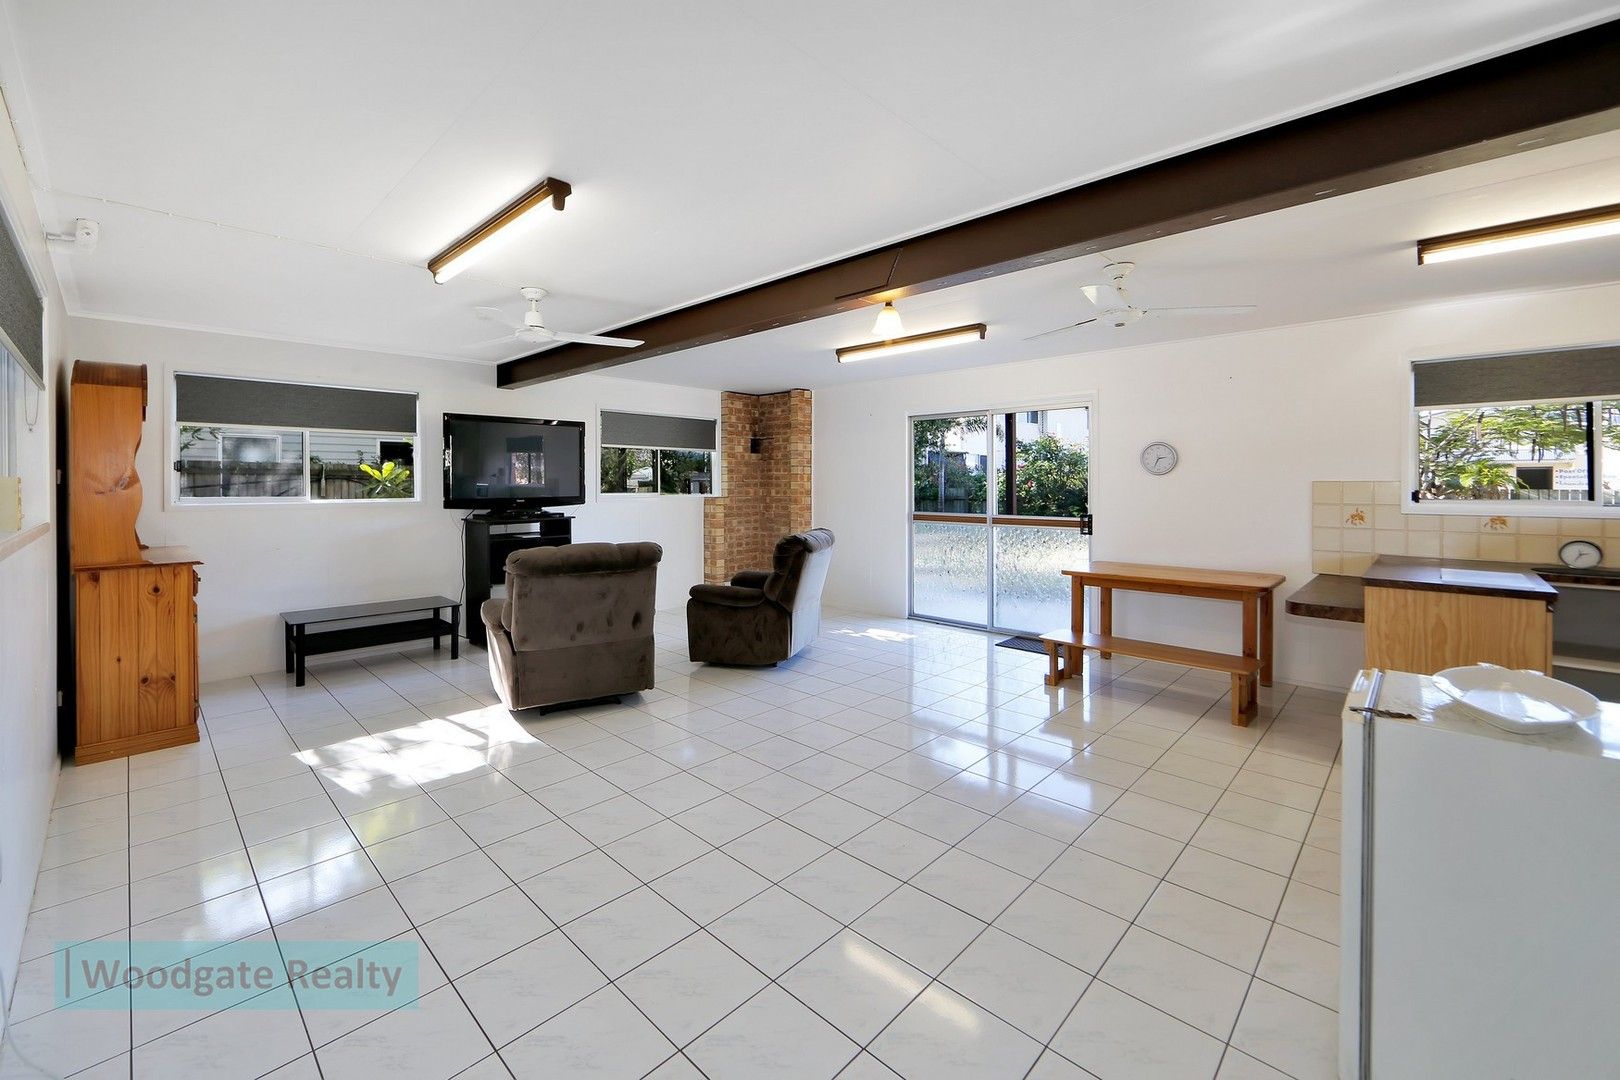 2 bedrooms House in 28 Bauhinia St WOODGATE QLD, 4660